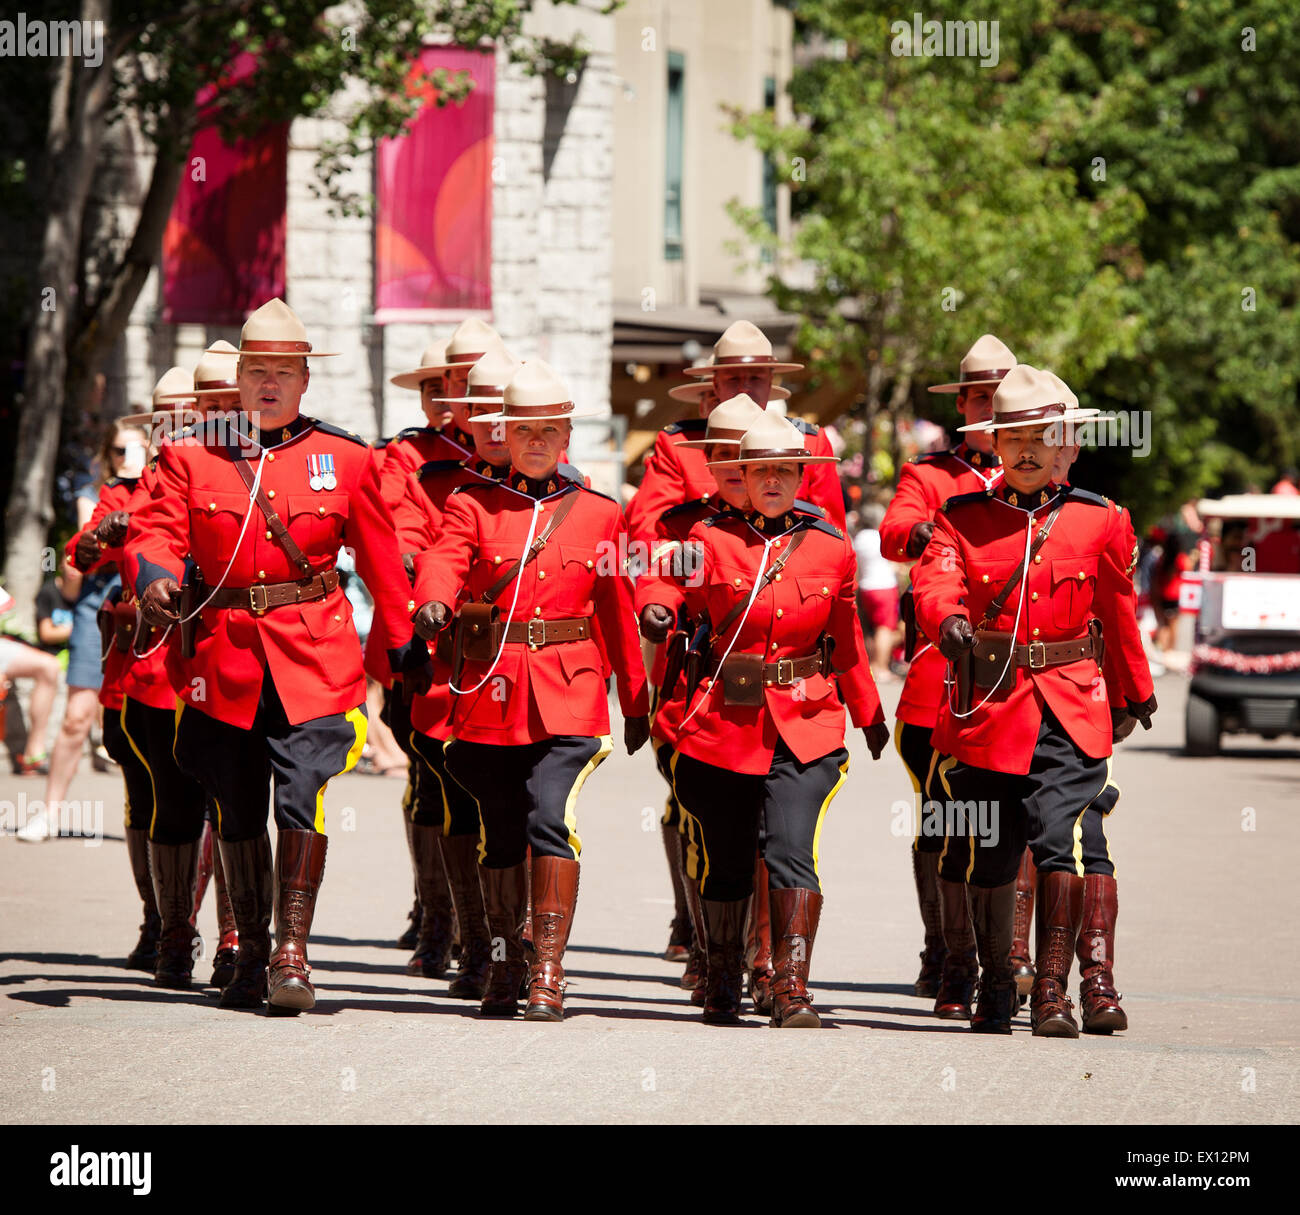 Royal Canadian Mounted Police officers parade in ceremonial red serge uniforms for Canada Day.  Canadian Police, or RCMP Stock Photo